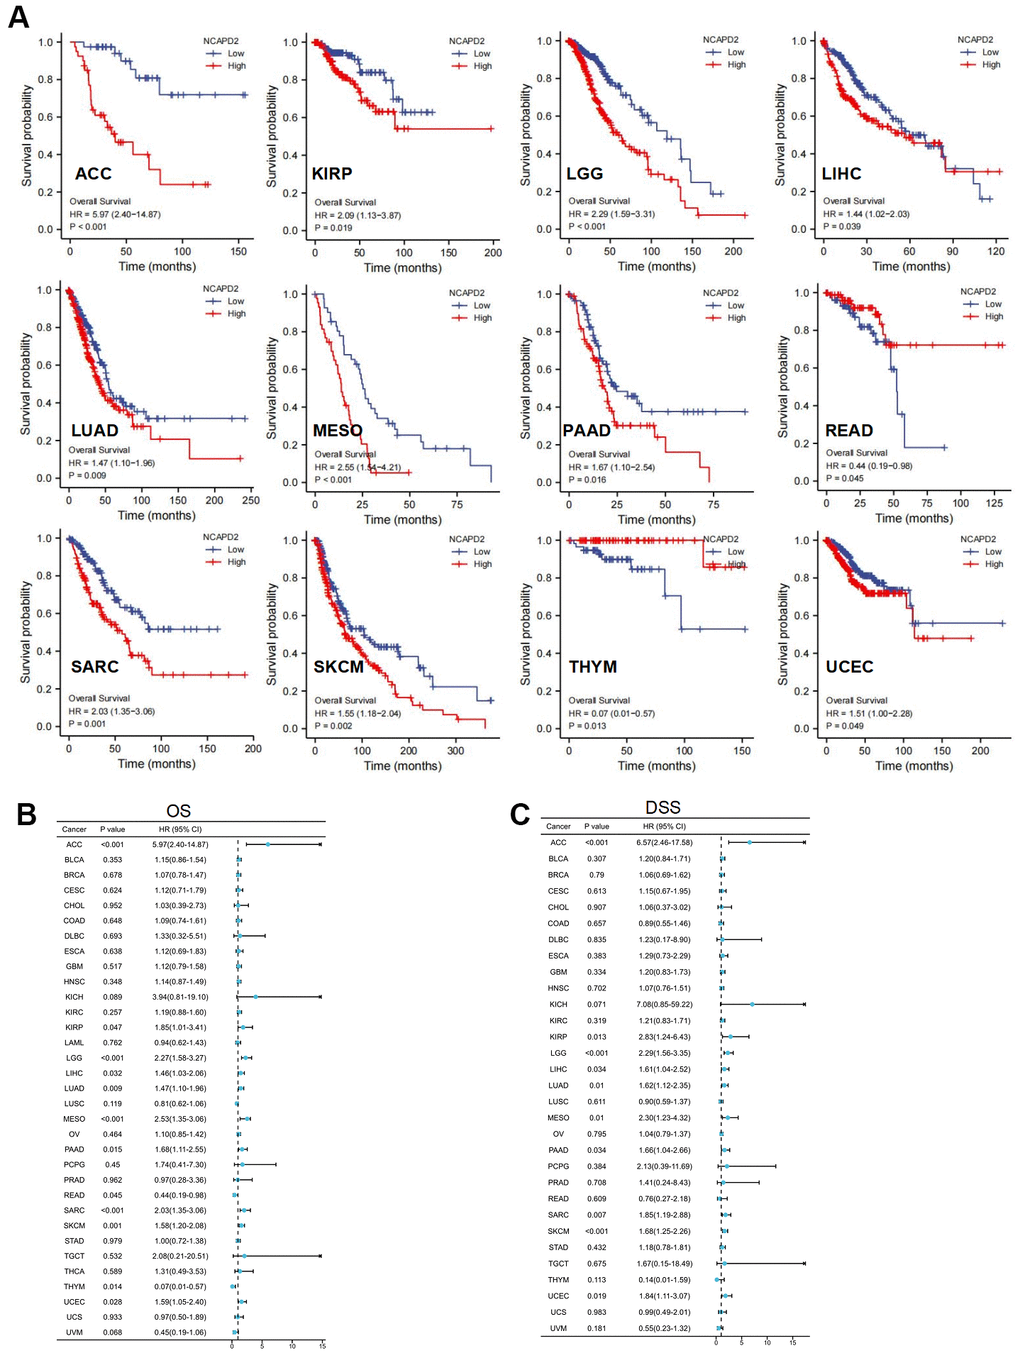 NCAPD2 prognosis in 33 cancers was analyzed using Kaplan-Meier survival and univariate Cox analysis. (A) Kaplan-Meier survival curve of NCAPD2 in high- and low-expression groups for OS in ACC, KIRP, LGG, LIHC, LUAD, MESO, PAAD, READ, SARC, SKCM, THYM, UCEC, and UVM. Univariate Cox regression analysis comparing NCAPD2 expression and (B) overall survival, and (C) disease-specific survival in 33 cancers.